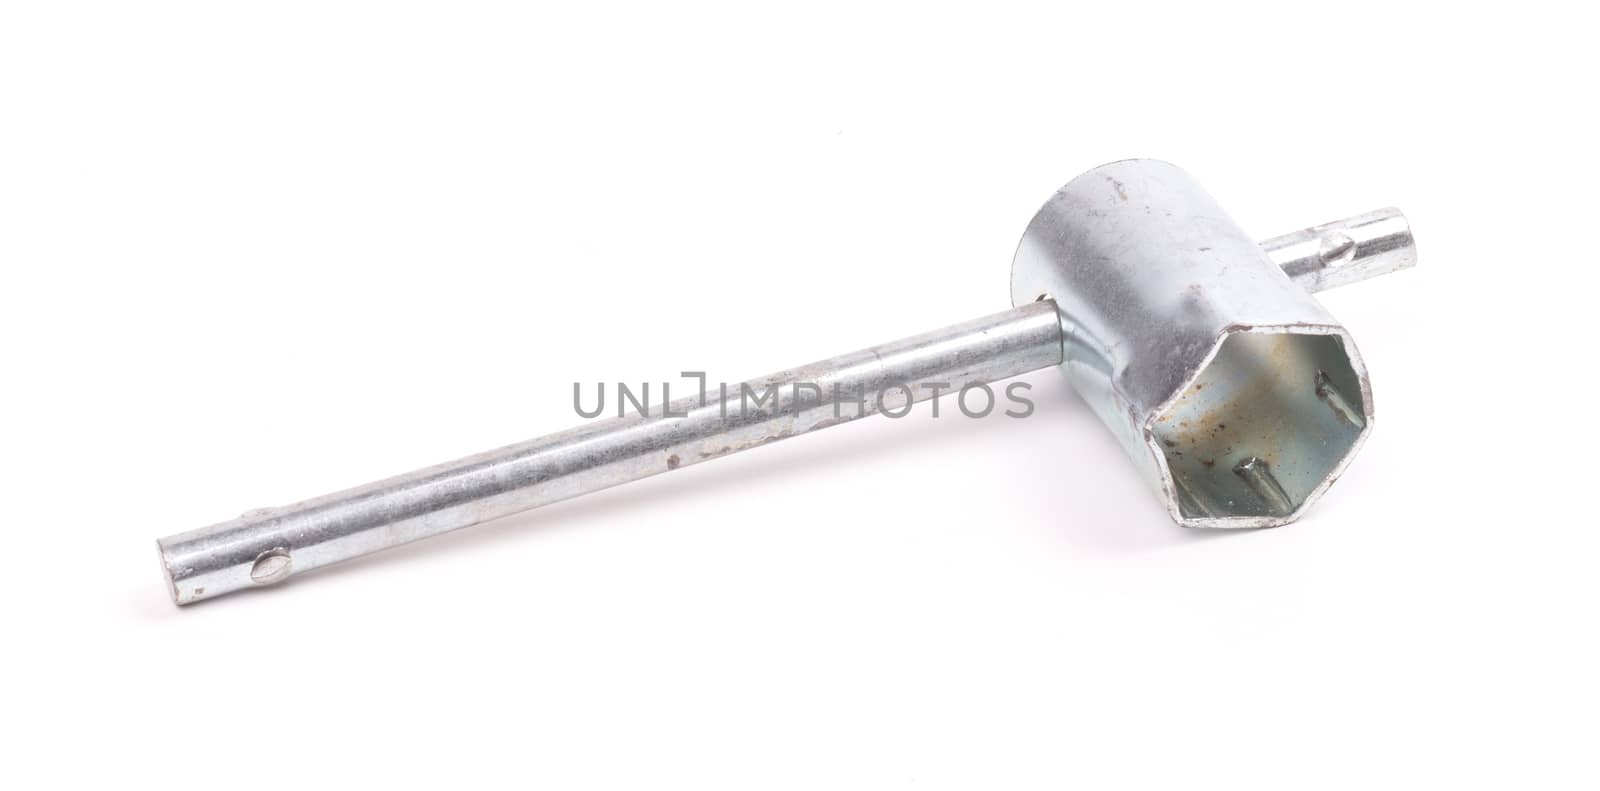 Wrench tool isolated on a white background